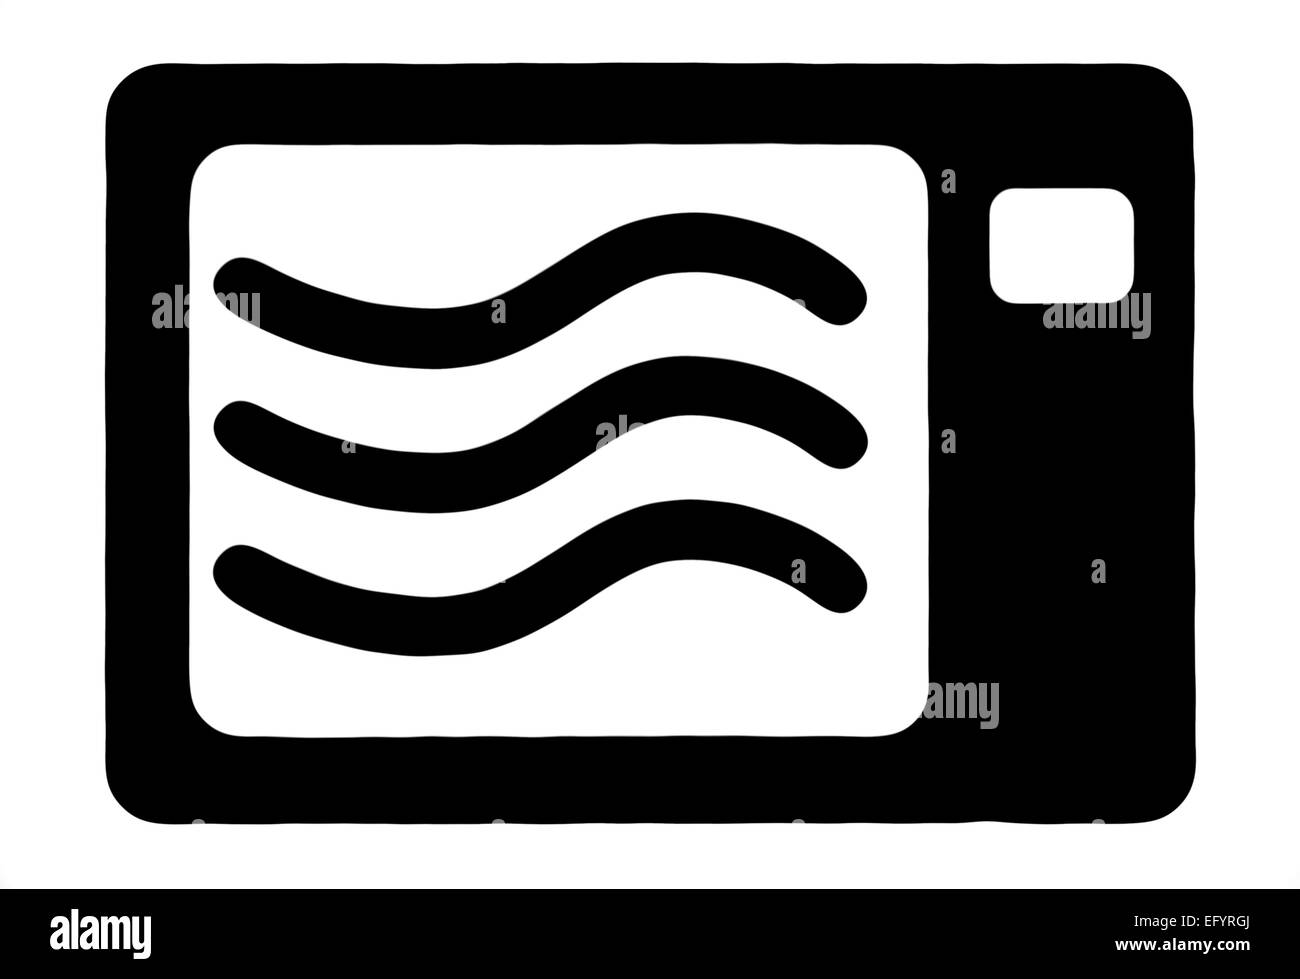 microwave cooker symbol Stock Photo